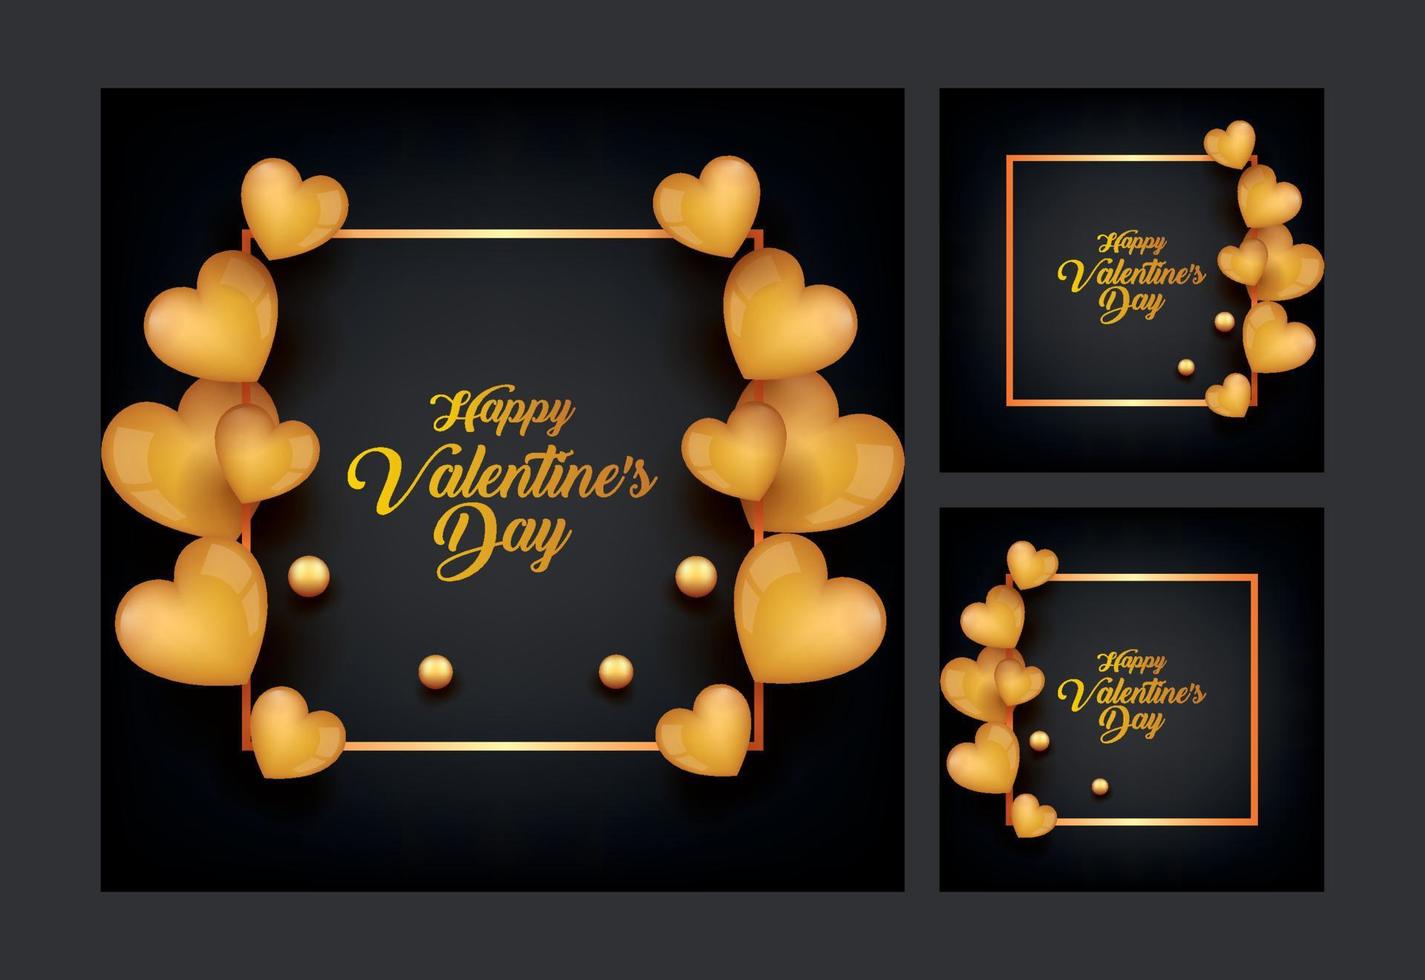 14 February Valentine's day greeting card social media template vector